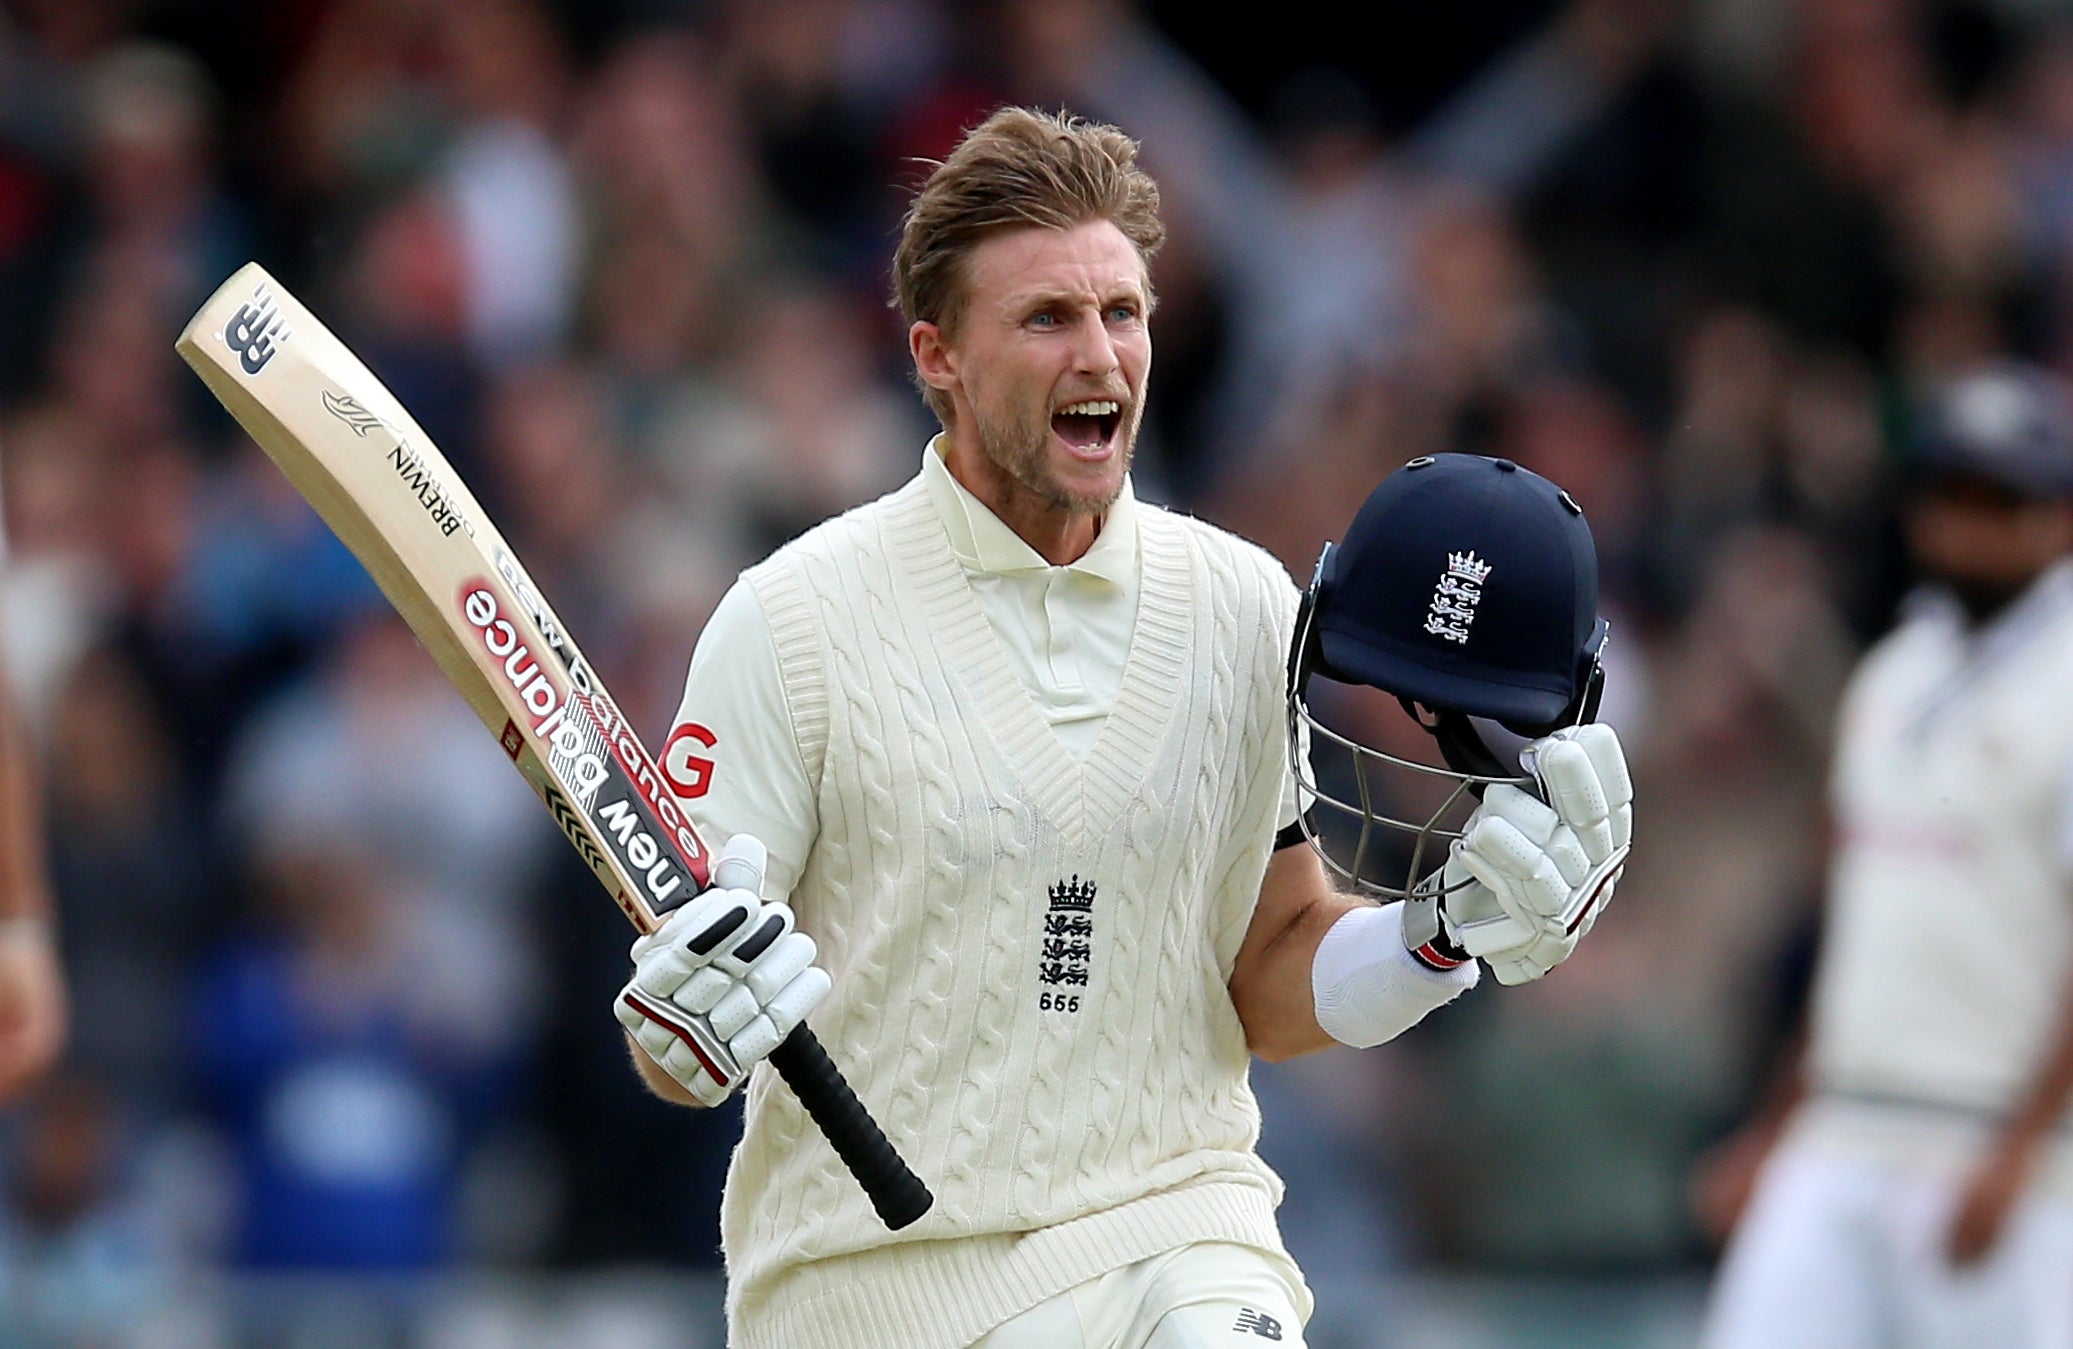 Joe Root has the chance to go big on day two in Barbados (Nigel French/PA)